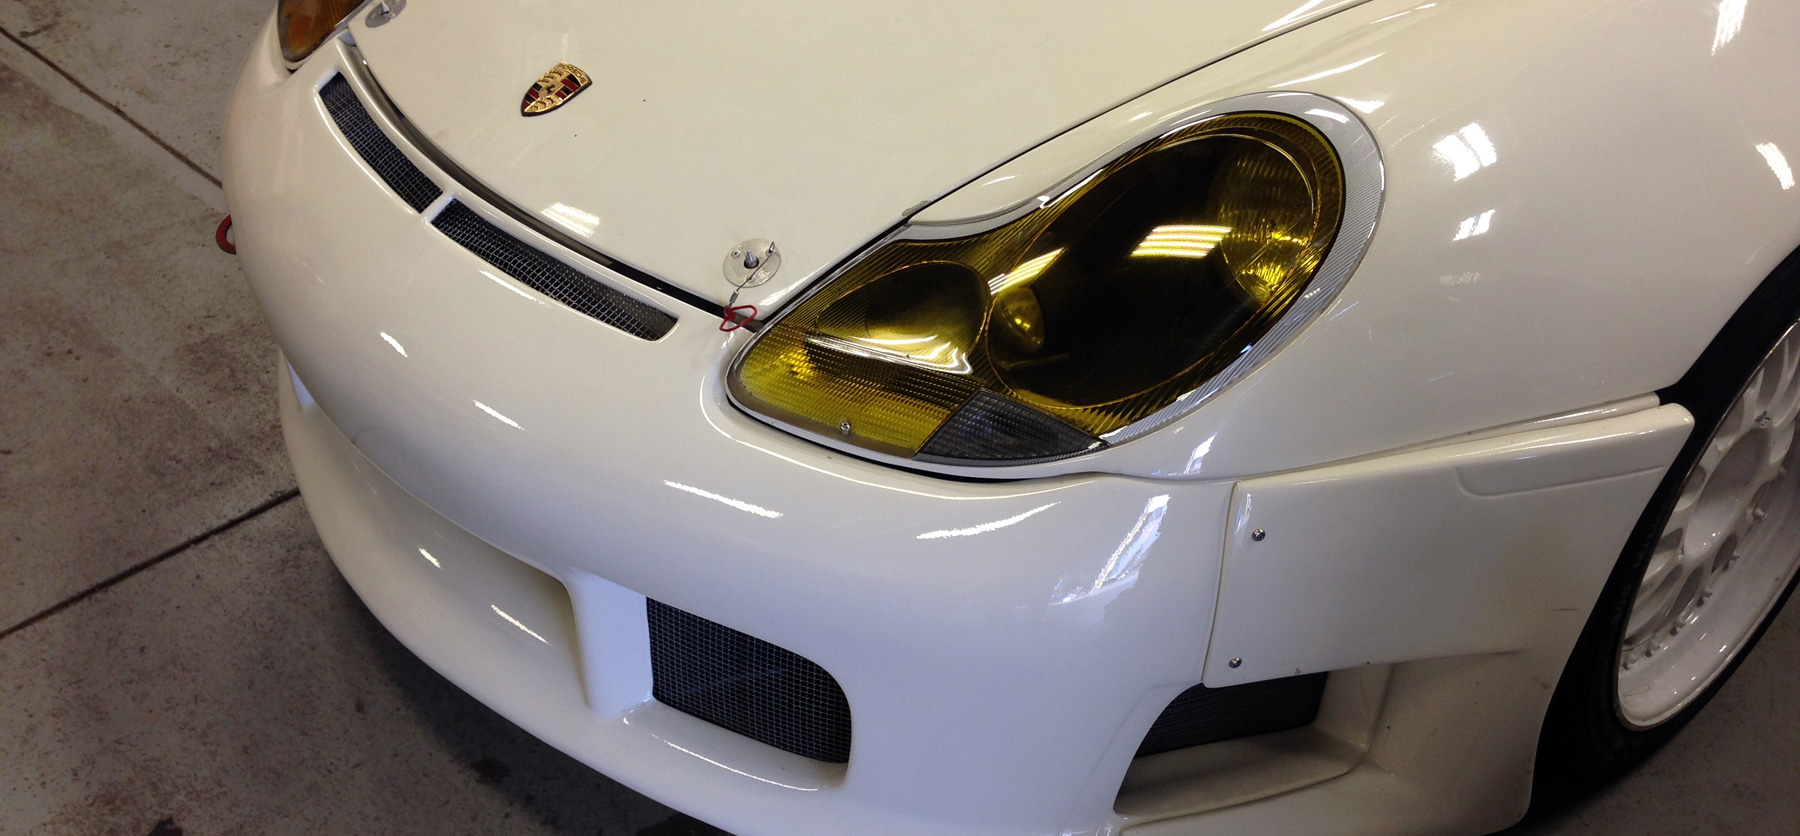 A close up picture of the front of a 996 GT3 RSR in white.